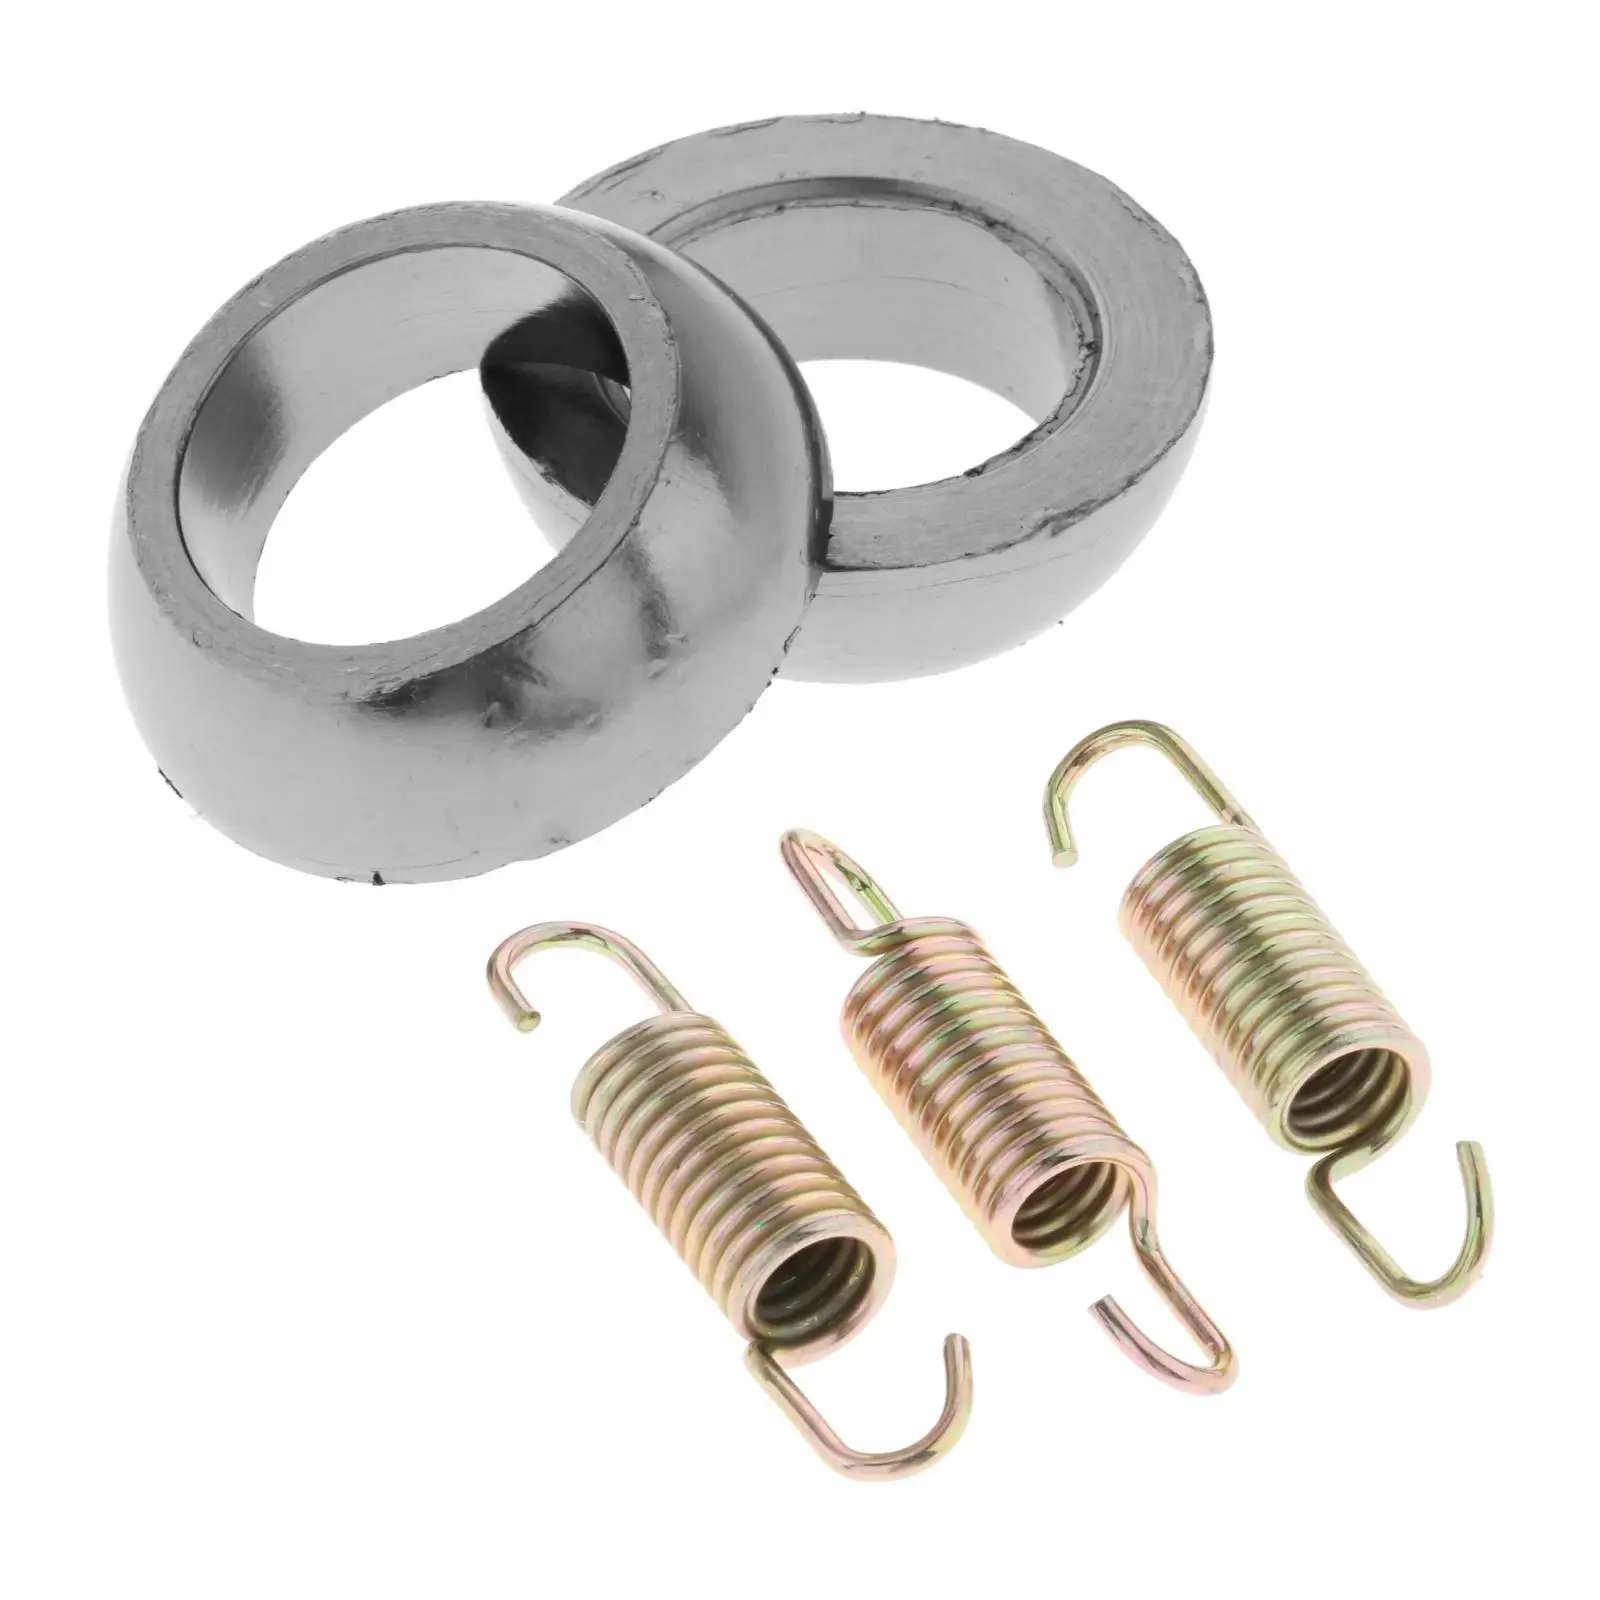 Motorbike Exhaust Gasket & Spring Kit Replacement Exhaust Pipe Springs & Gasket Kit Fit for Arctic Cat 300 1998 1999 - 2005